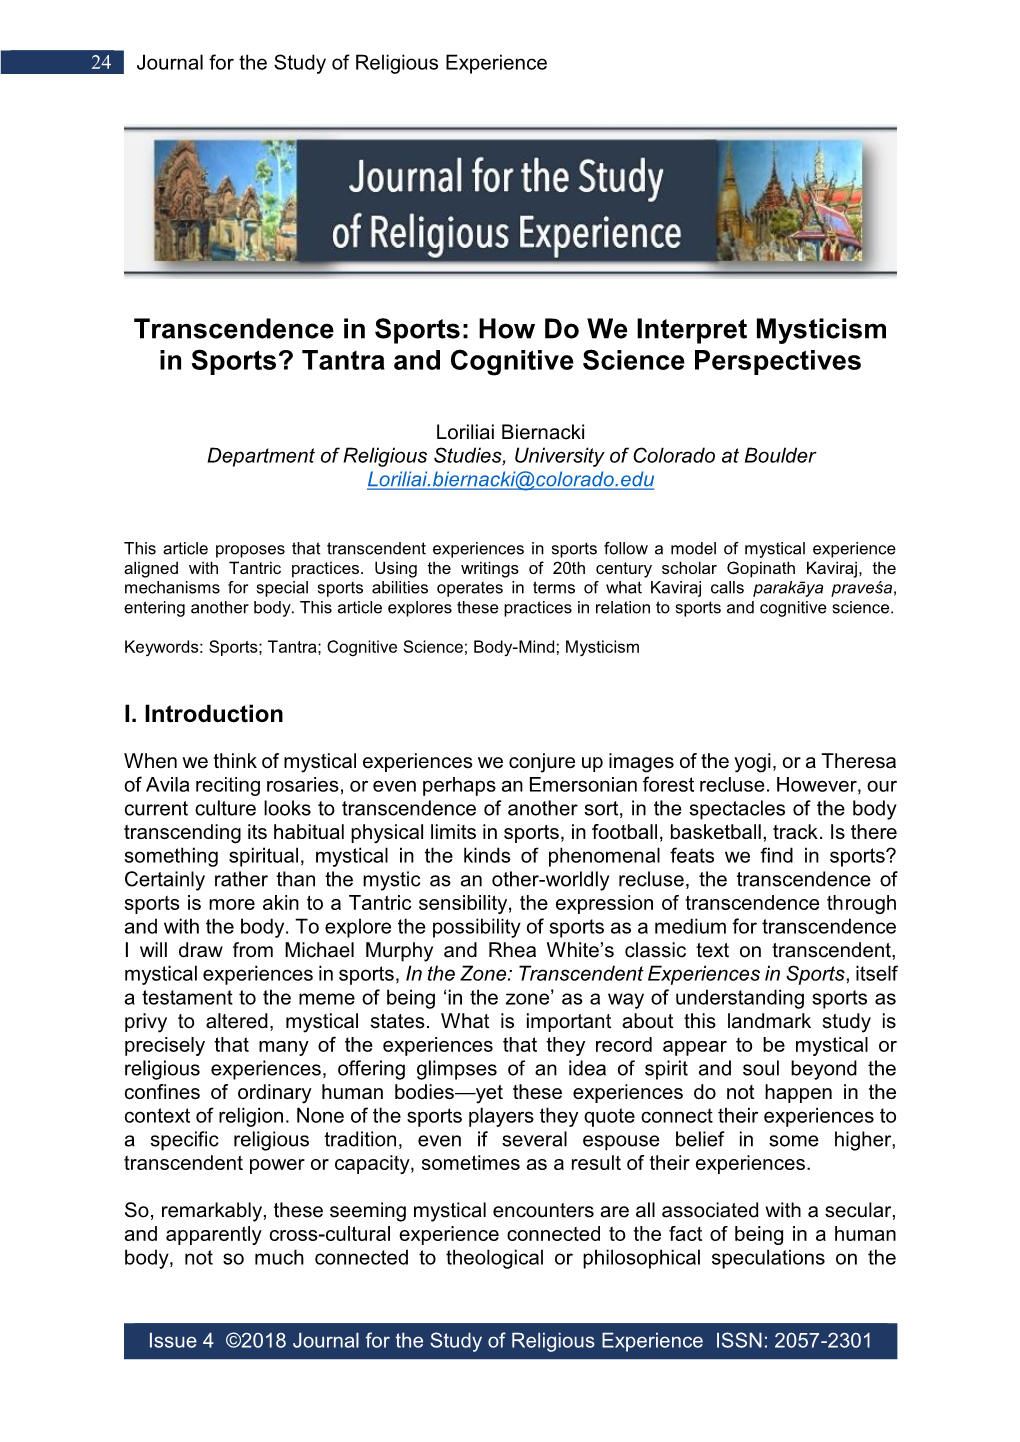 Transcendence in Sports: How Do We Interpret Mysticism in Sports? Tantra and Cognitive Science Perspectives